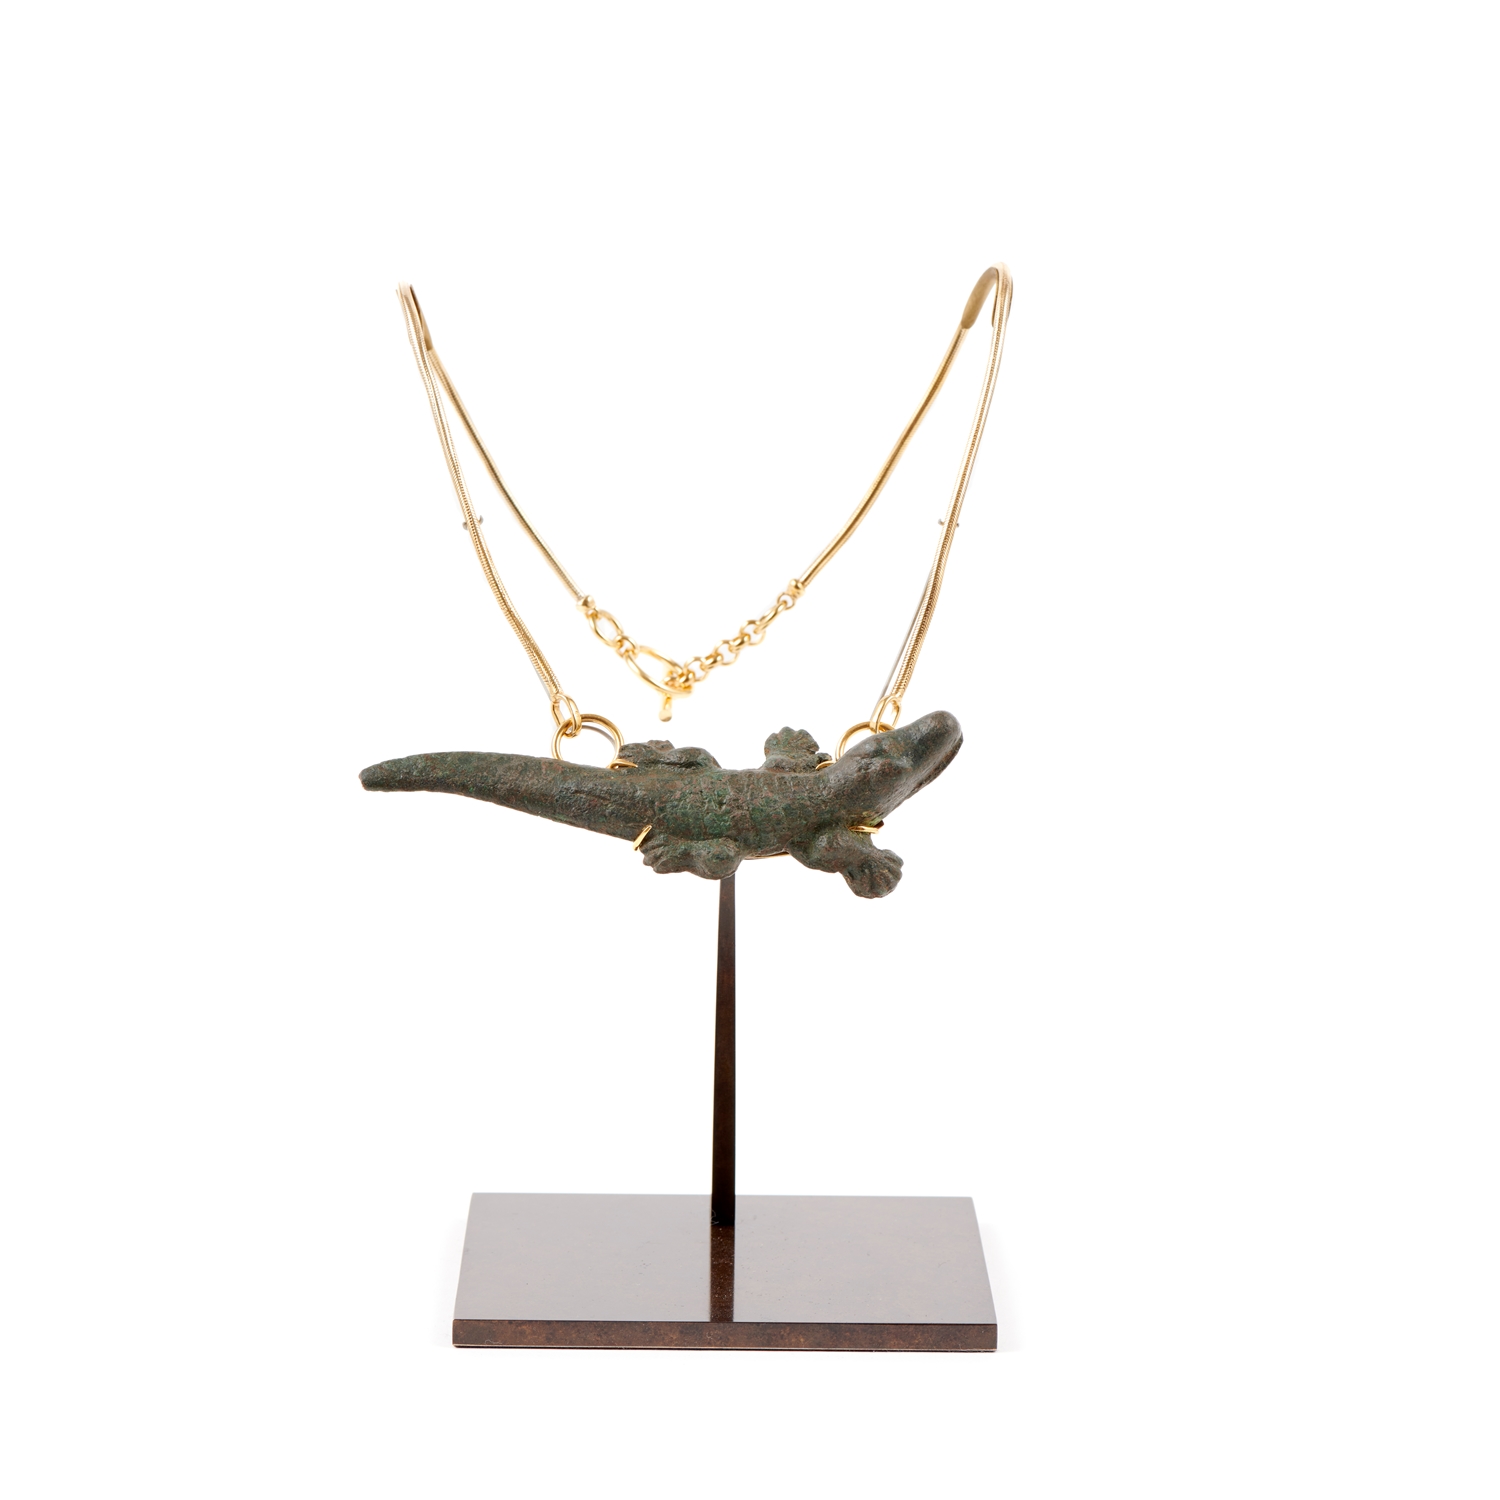 UNIQUE NECKLACE WITH A RARE  ANTIQUE EGYPTIAN CROCODILE IN EFFIGY OF THE GOD SOBEK